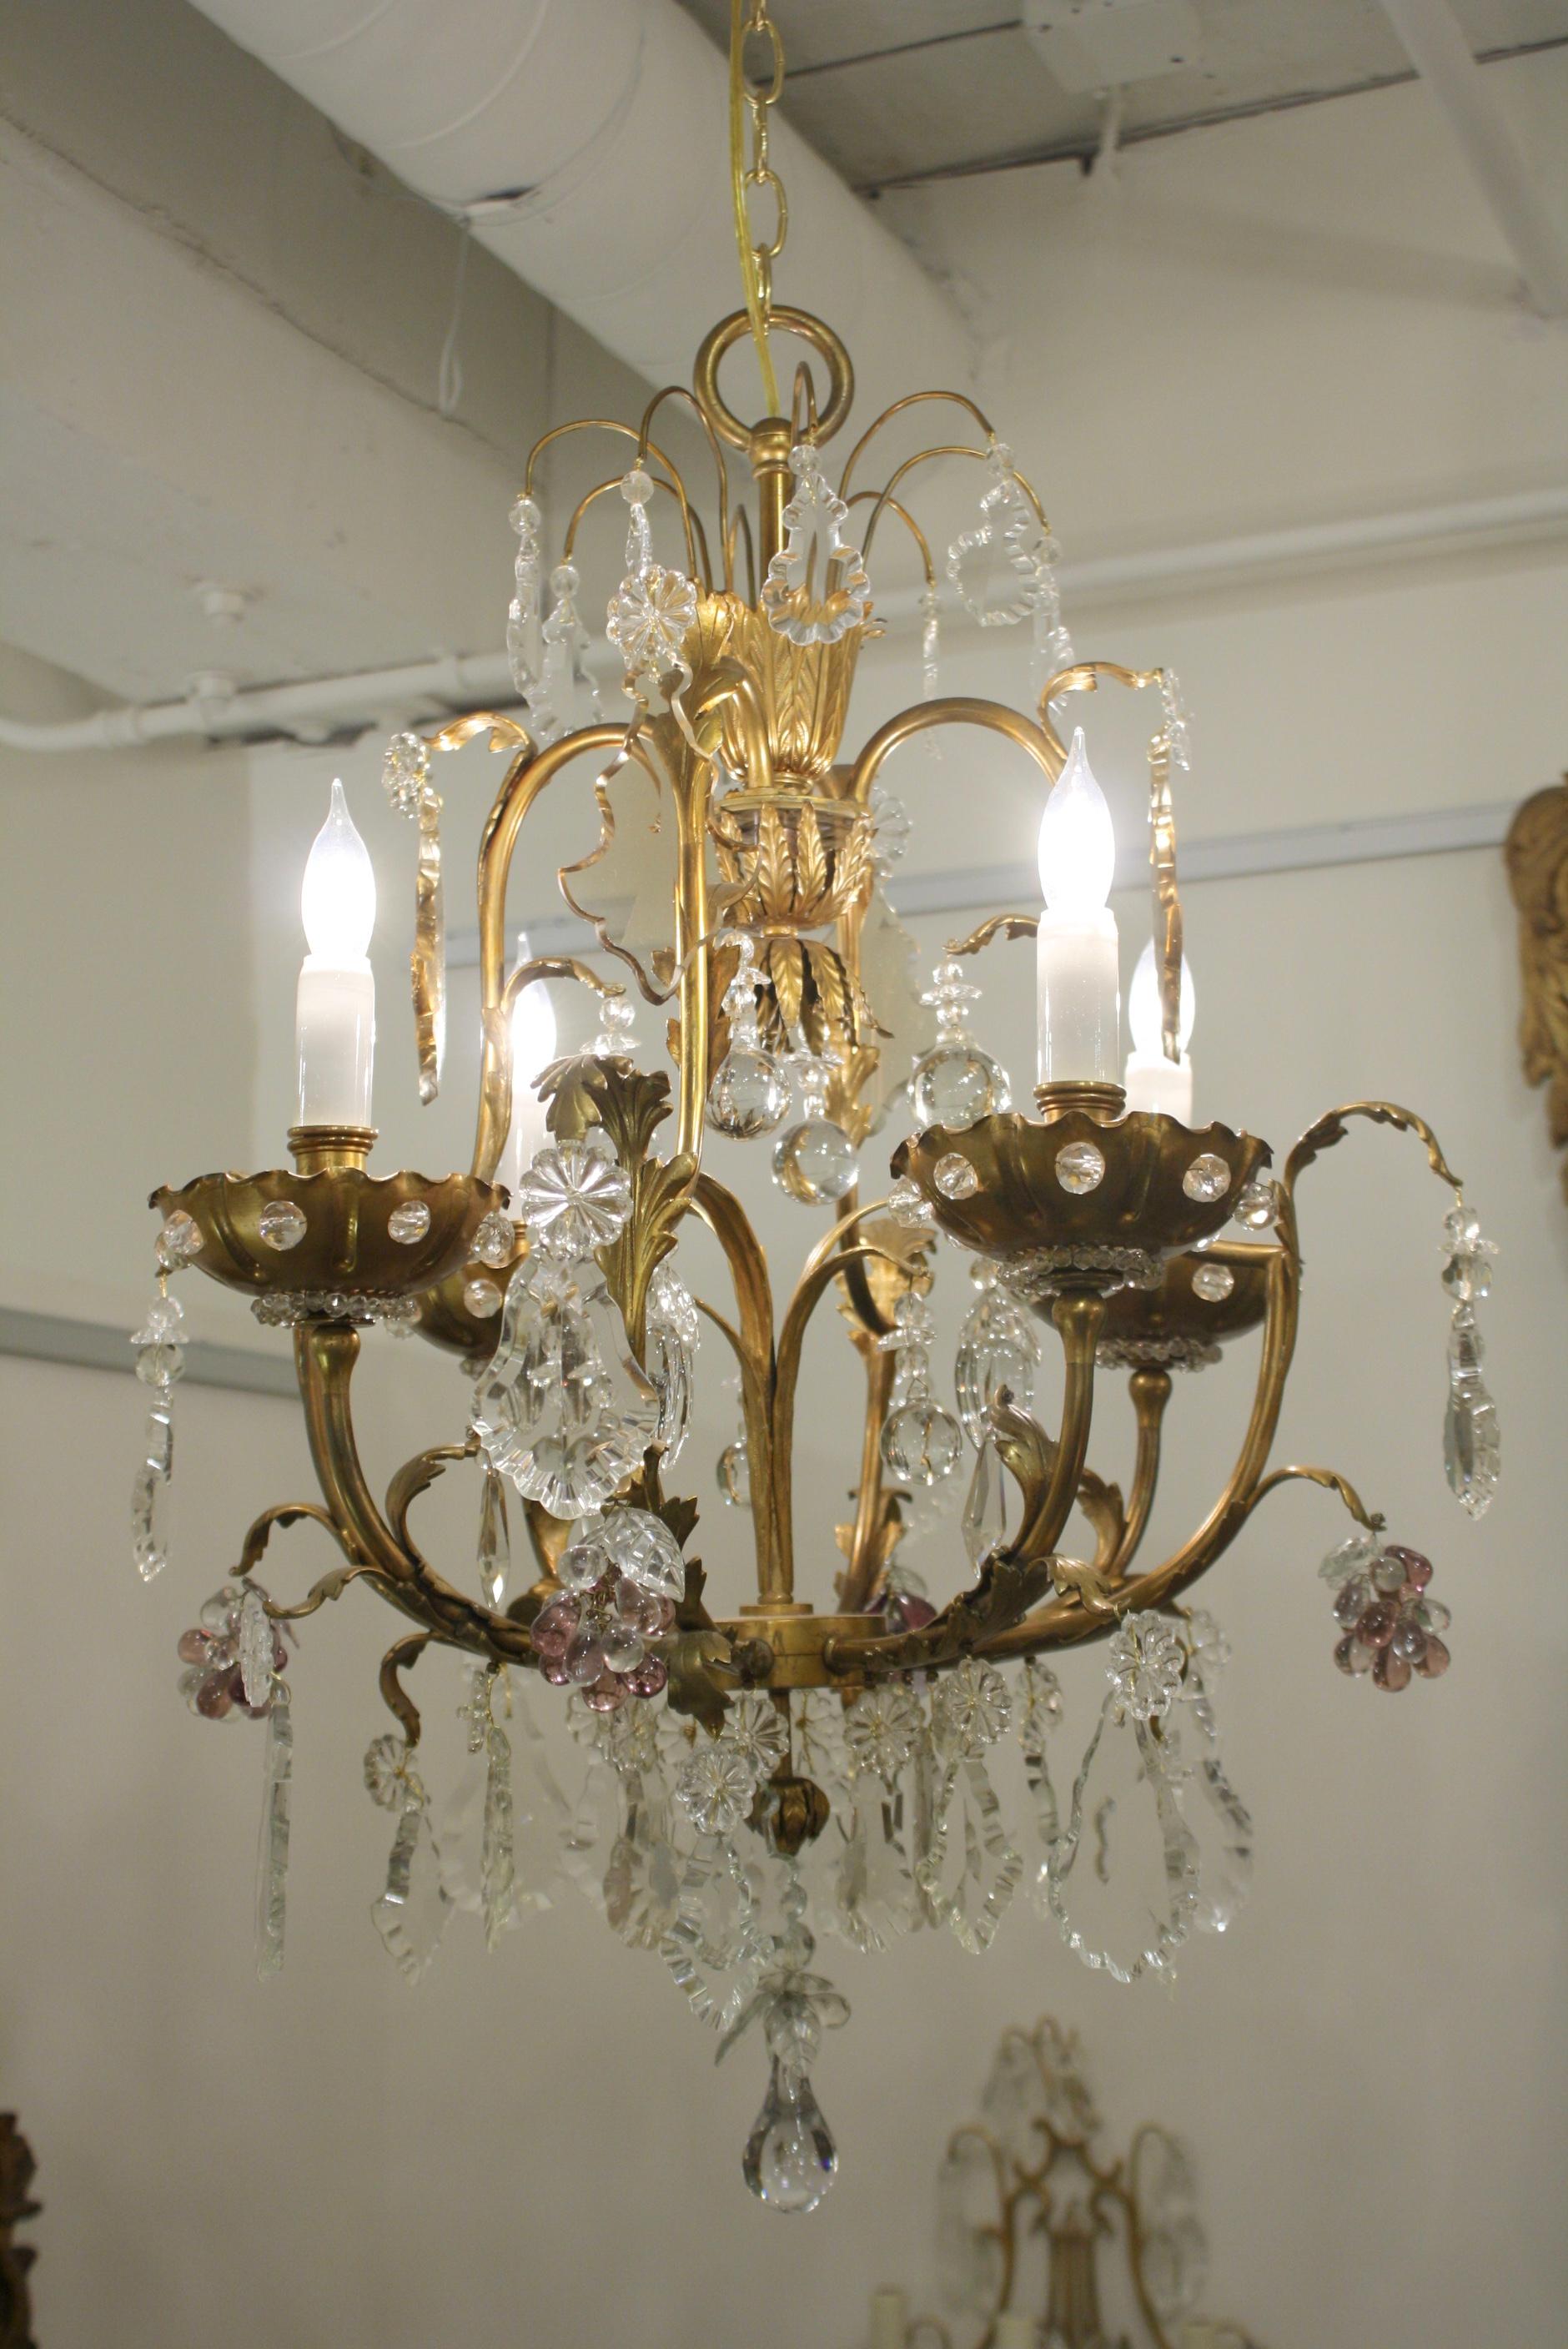 French bronze and crystal cage-form chandelier with four lights attributed to Maison Jansen. This chandelier is ornamented with a variety of different cut crystal pendalogues, grape clusters and pierced bobesches with crystal beads. The interior